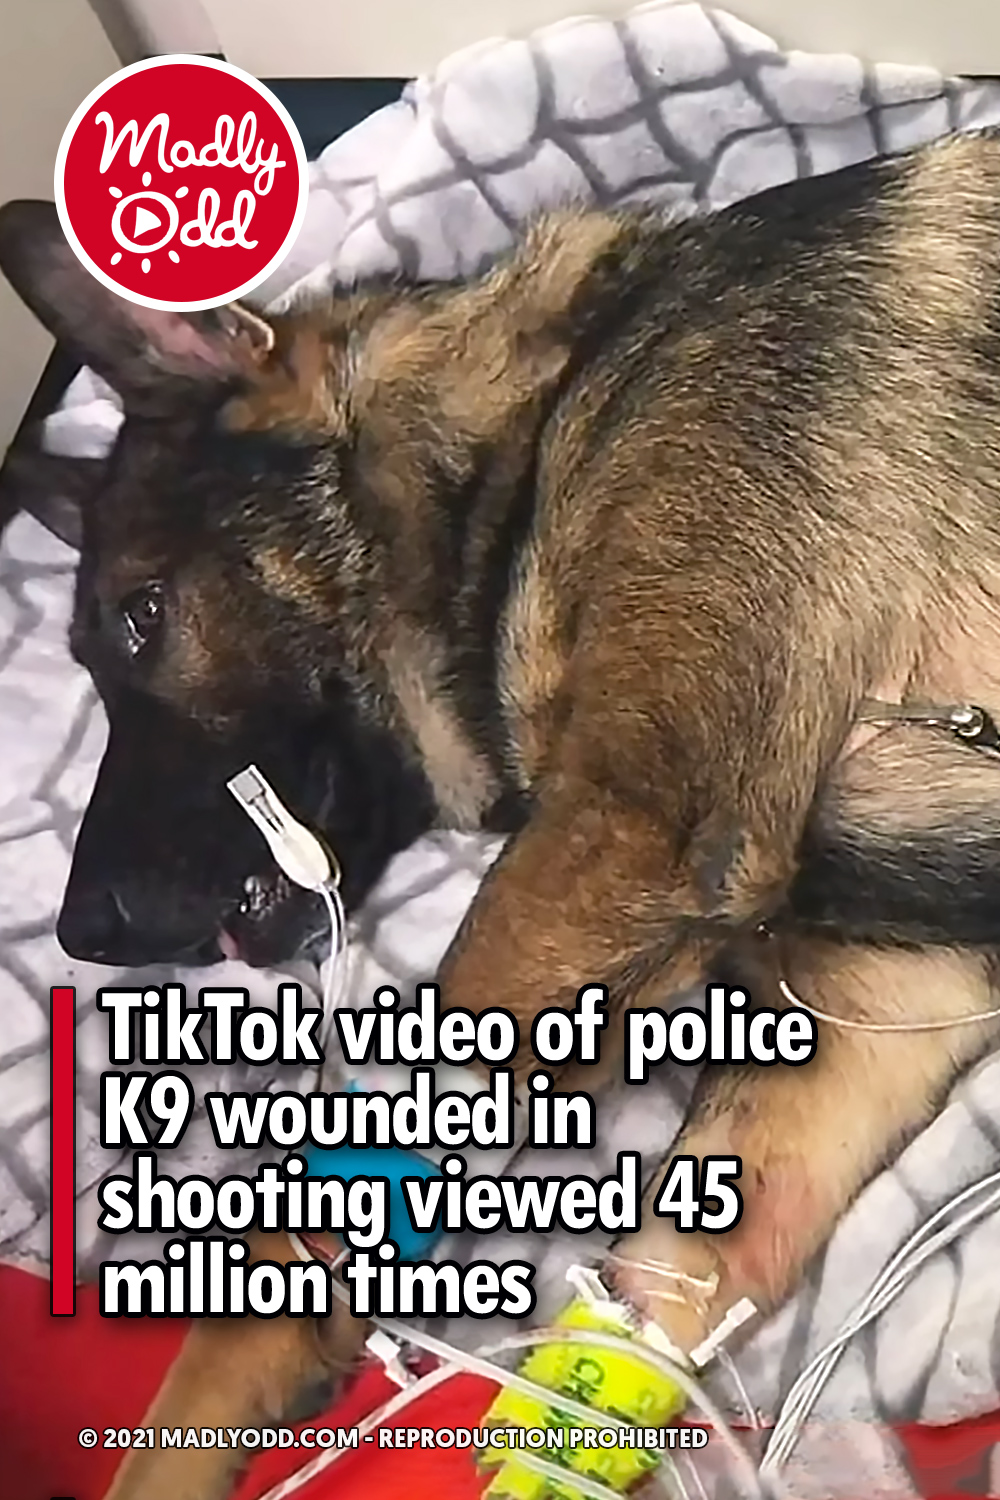 TikTok video of police K9 wounded in shooting viewed 45 million times